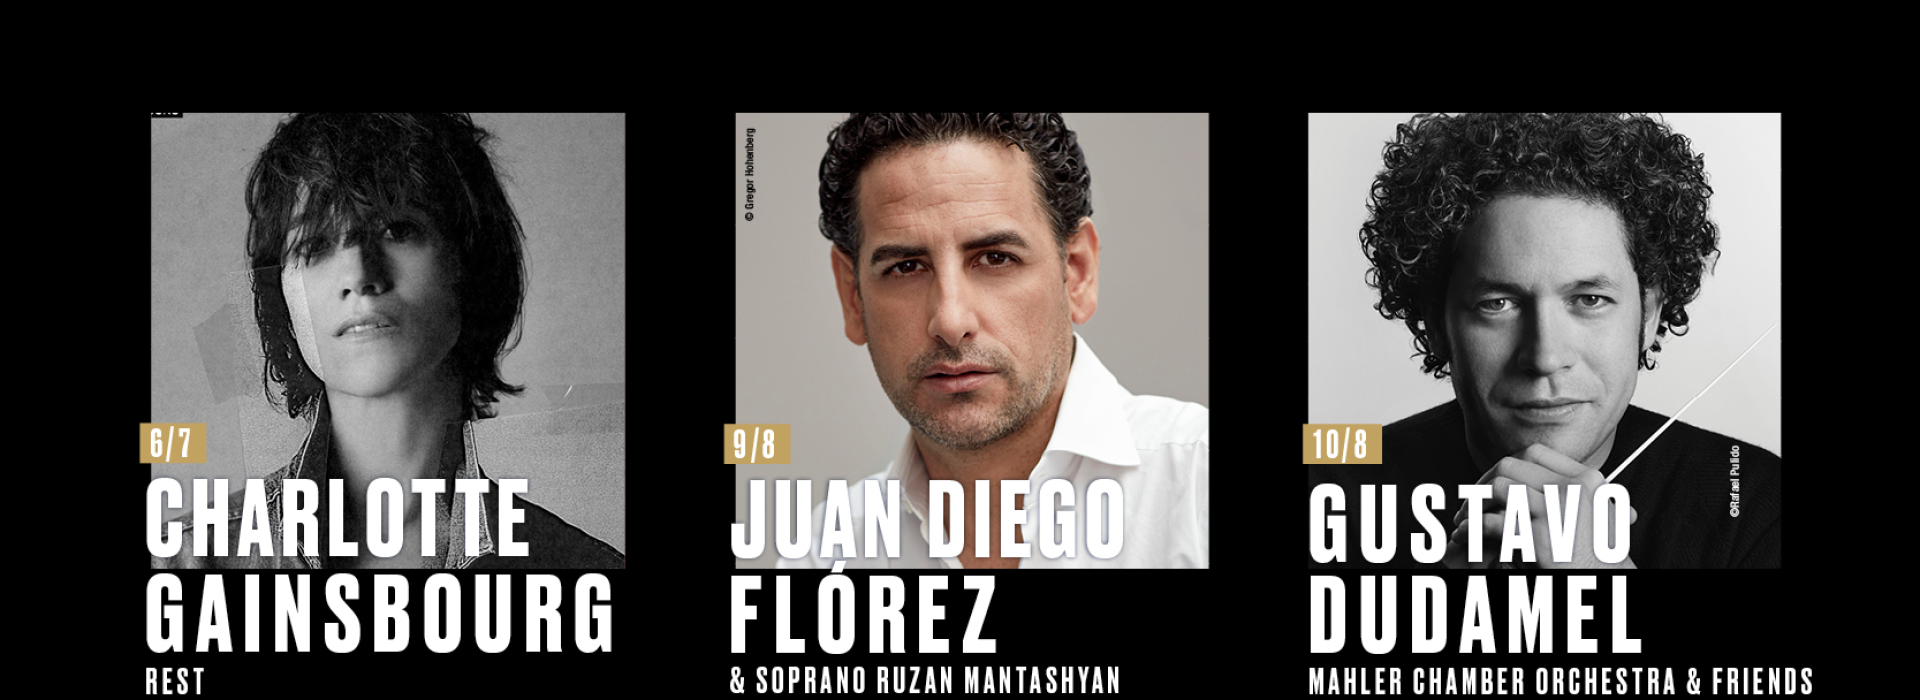 Singer and actress Charlotte Gainsbourg, tenor Juan Diego Flórez and conductor Gustavo Dudamel will be performing at the 33rd edition of the Festival.